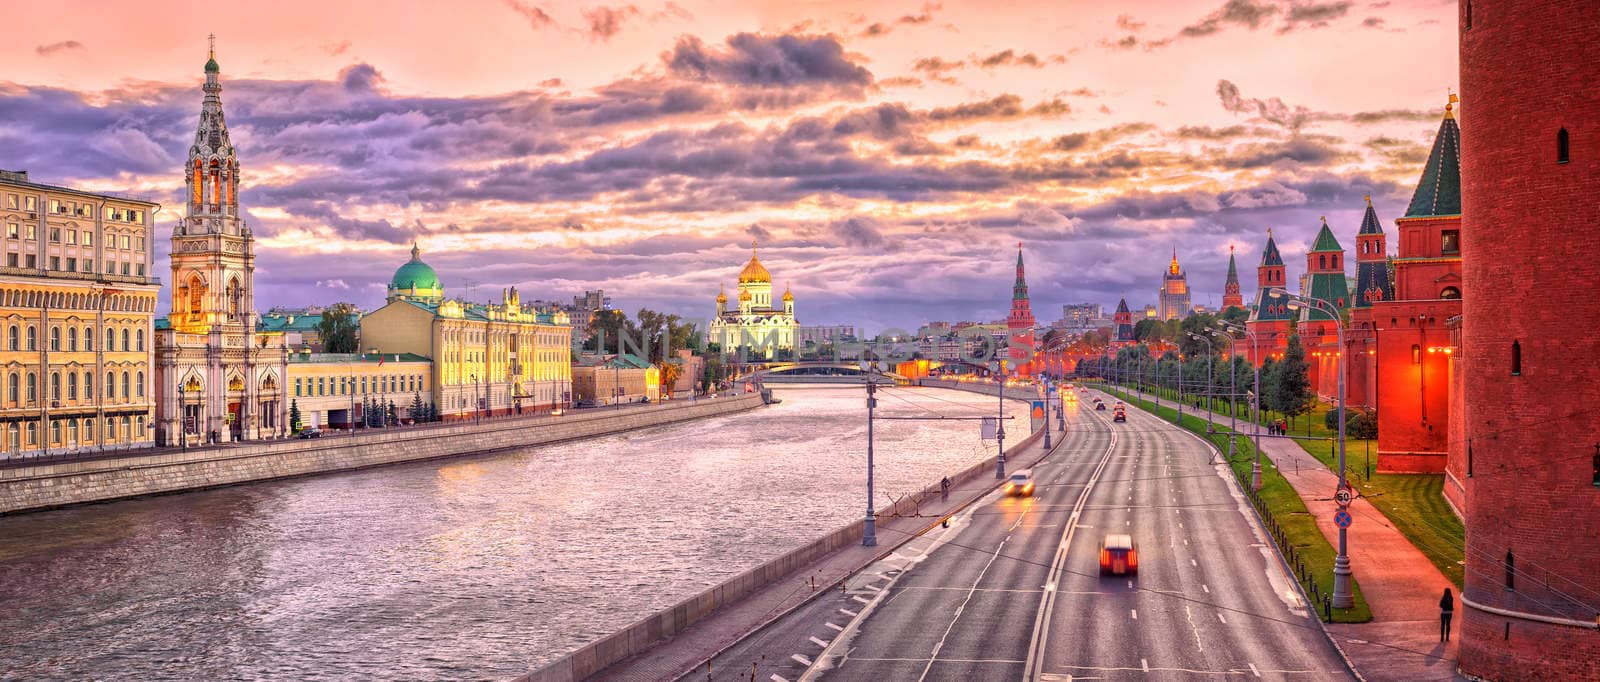 Moscow skyline at red evening light, Russian Federation by GlobePhotos